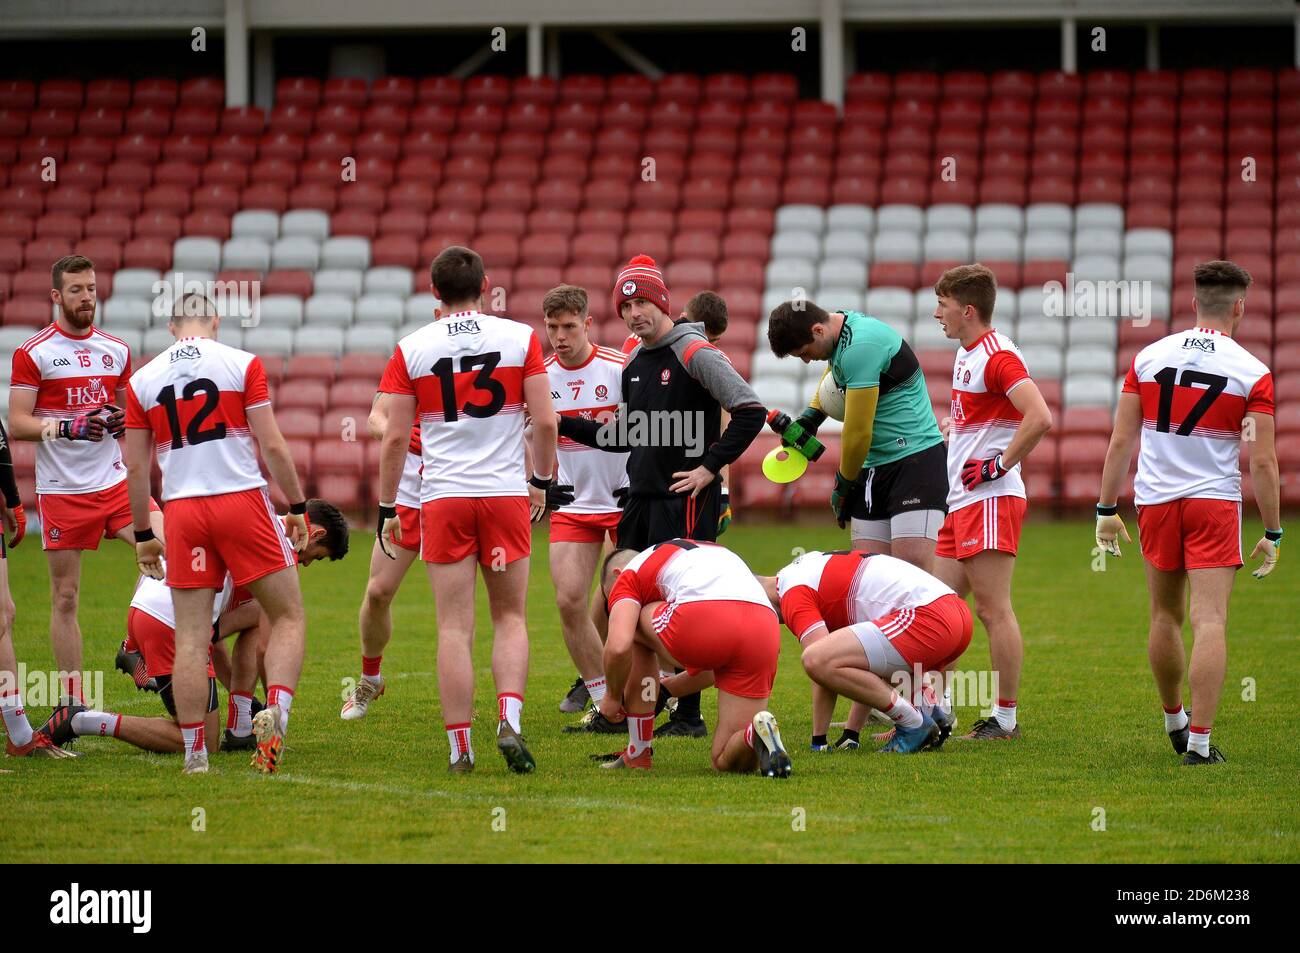 Derry senior football manager Rory Gallagher instructing players prior to the Inter County Championship gaelic football game against Longford in Celtic Park, 17th October 2020. ©George Sweeney / Alamy Stock Photo Stock Photo